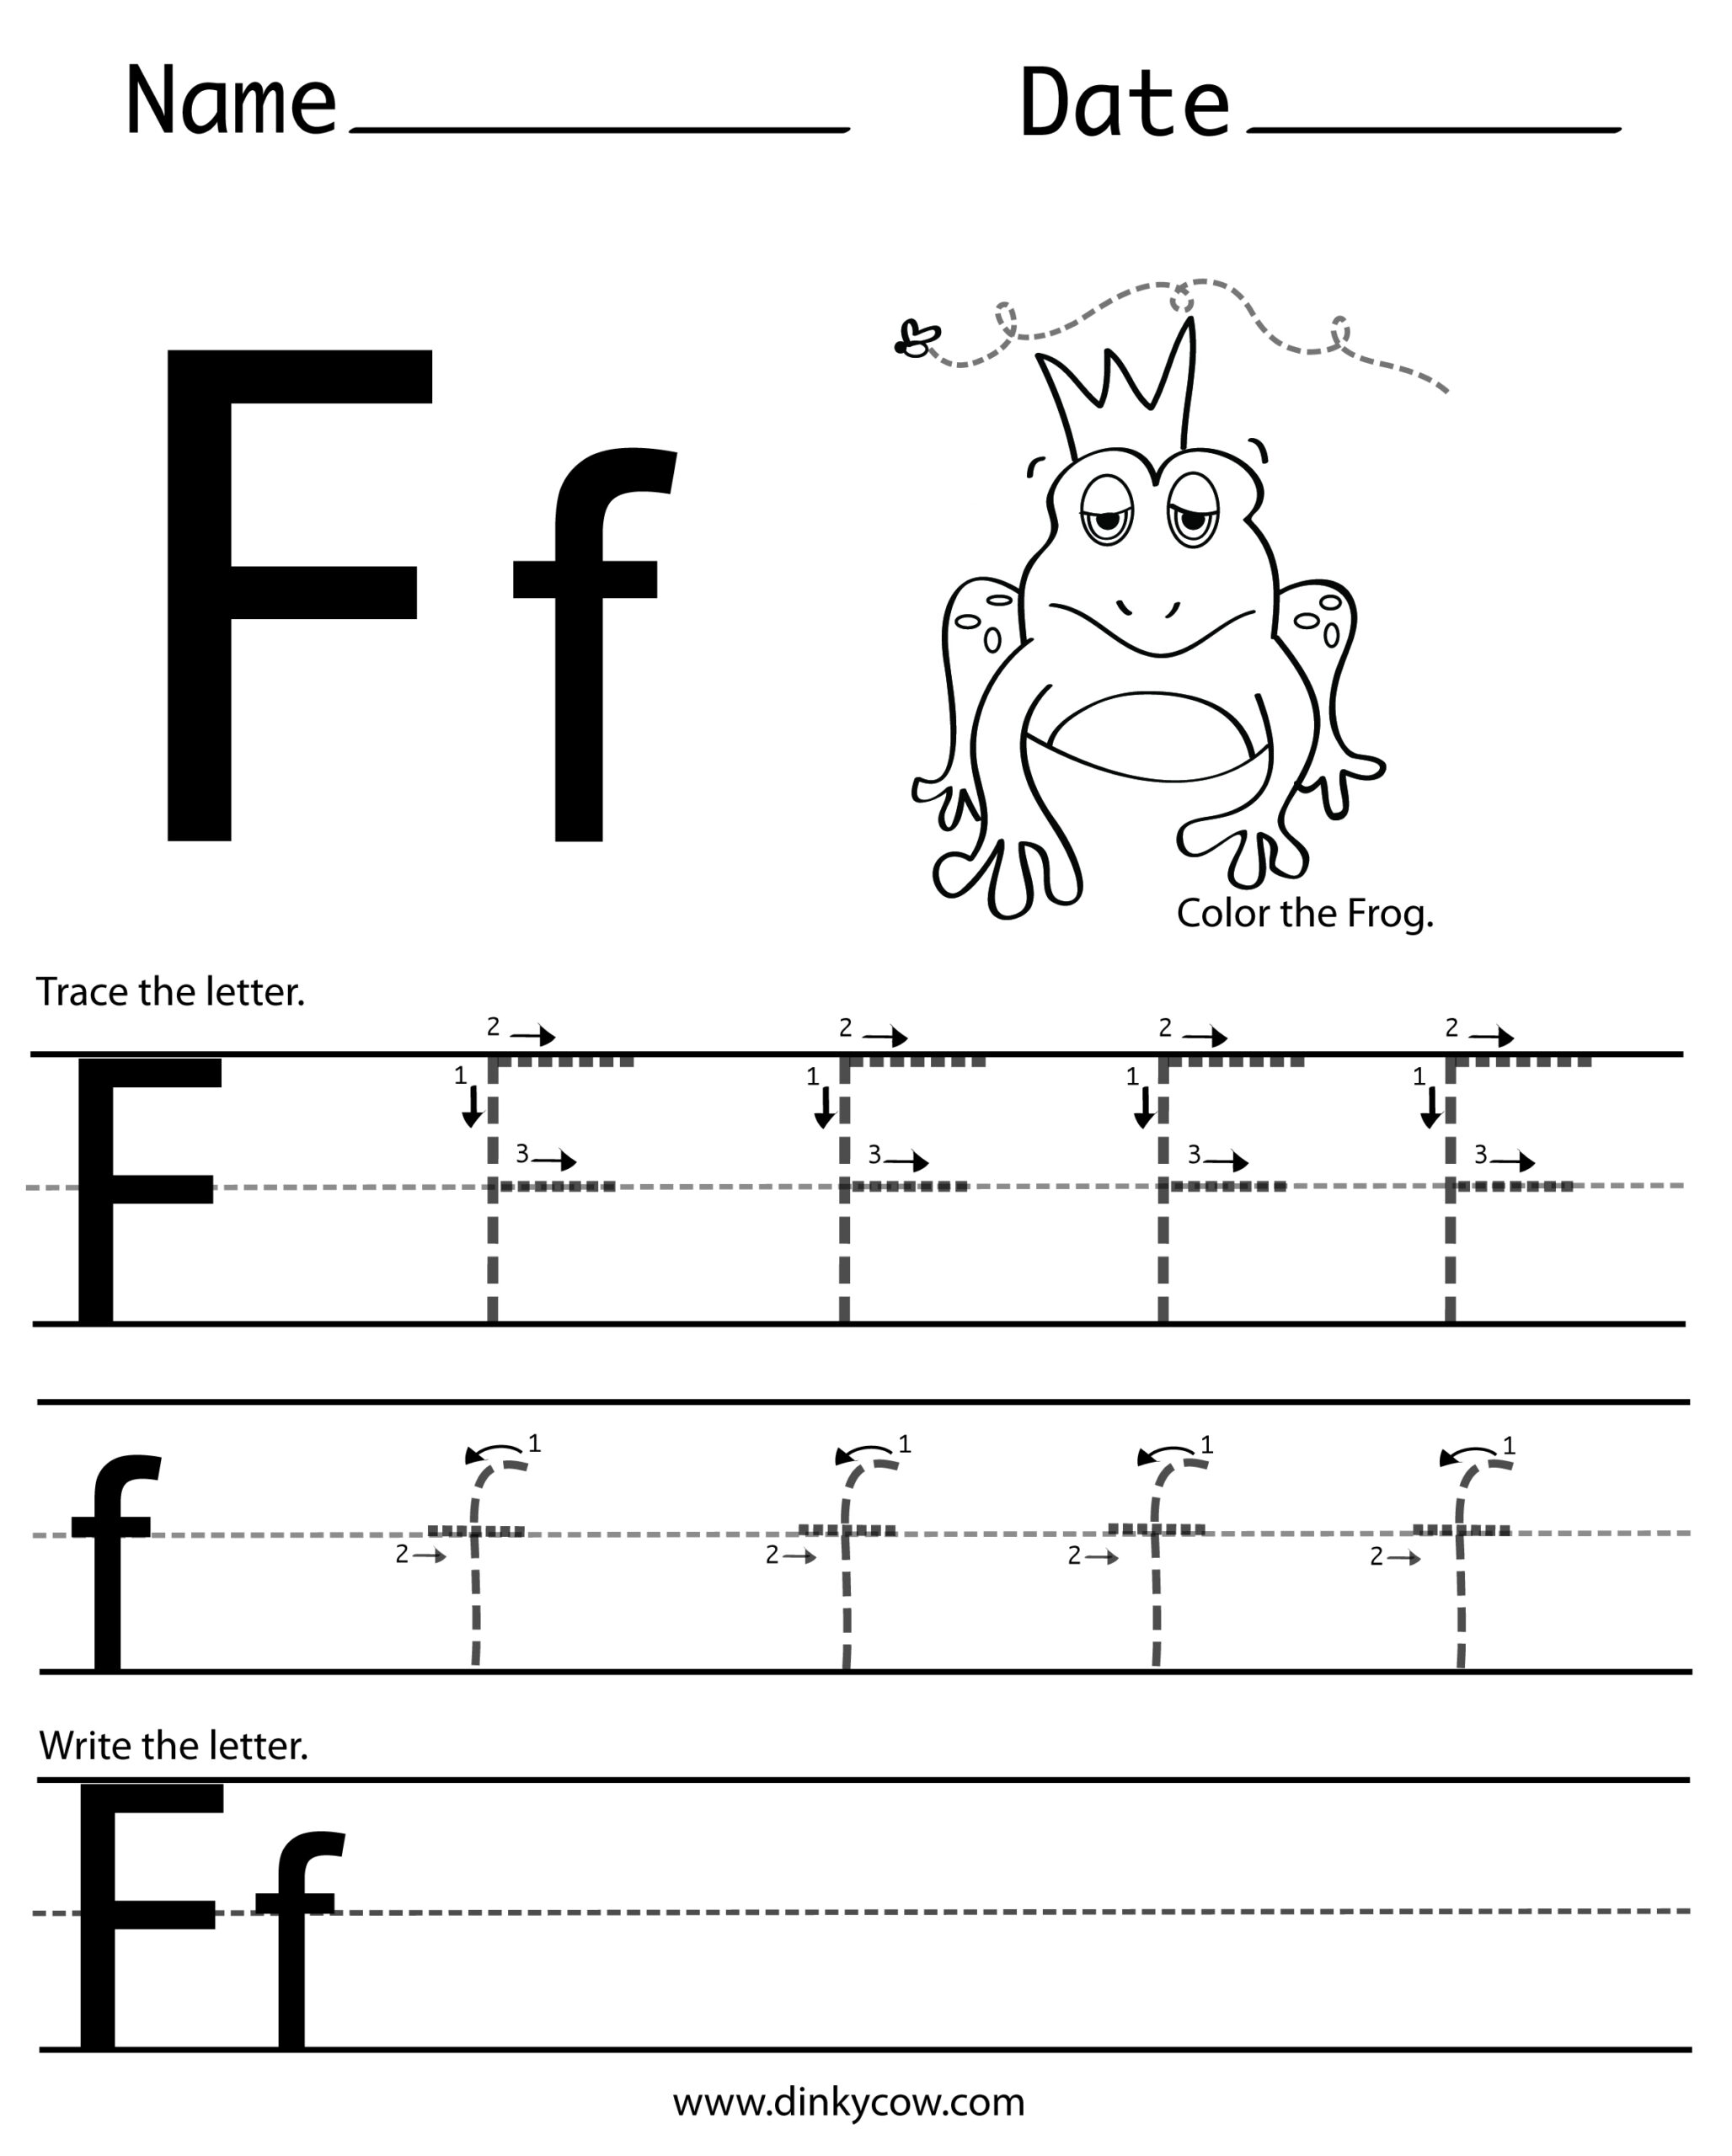 8 Best Images Of Free Printable Alphabet Worksheets Letter F throughout Letter F Tracing Page